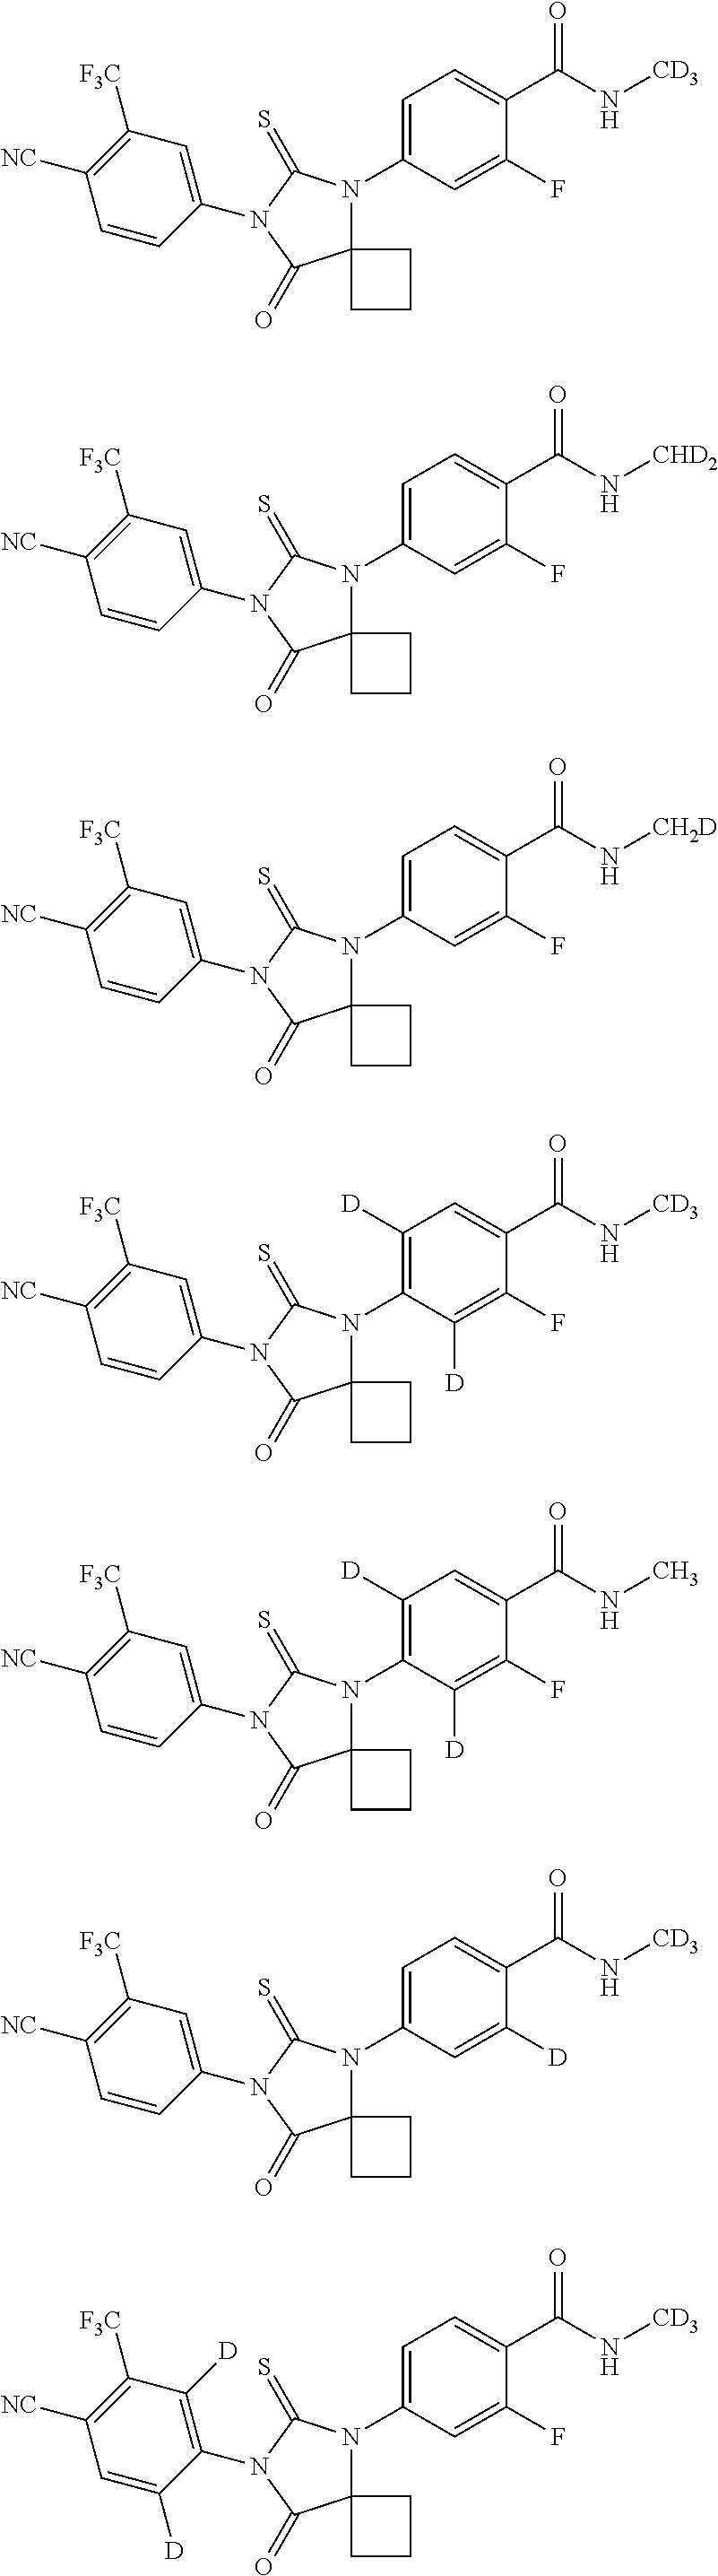 Imidazolidinedione compounds and their uses